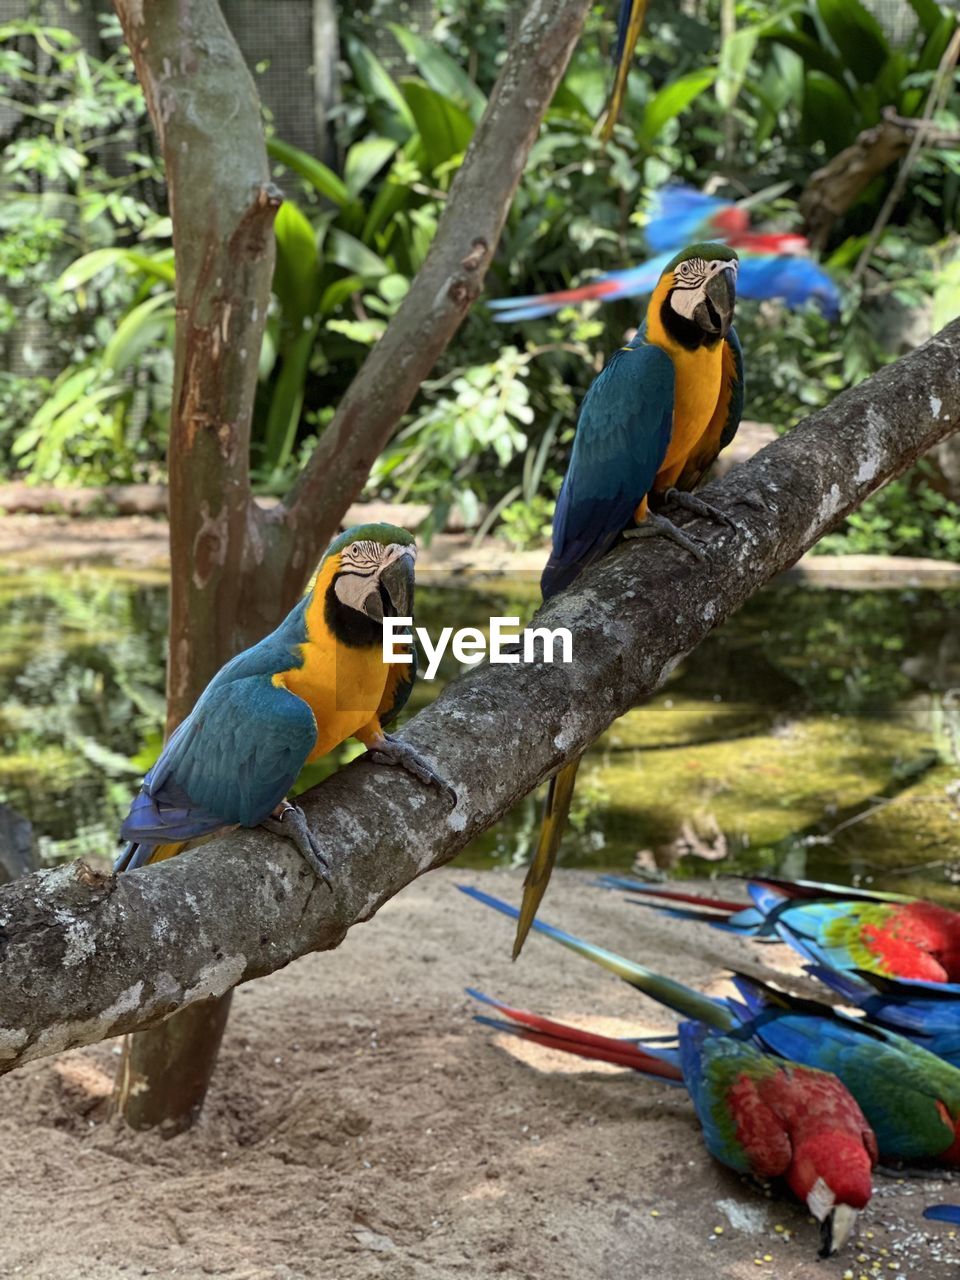 animal themes, animal, bird, animal wildlife, pet, wildlife, parrot, group of animals, tree, perching, two animals, nature, multi colored, branch, gold and blue macaw, no people, plant, day, beak, outdoors, beauty in nature, land